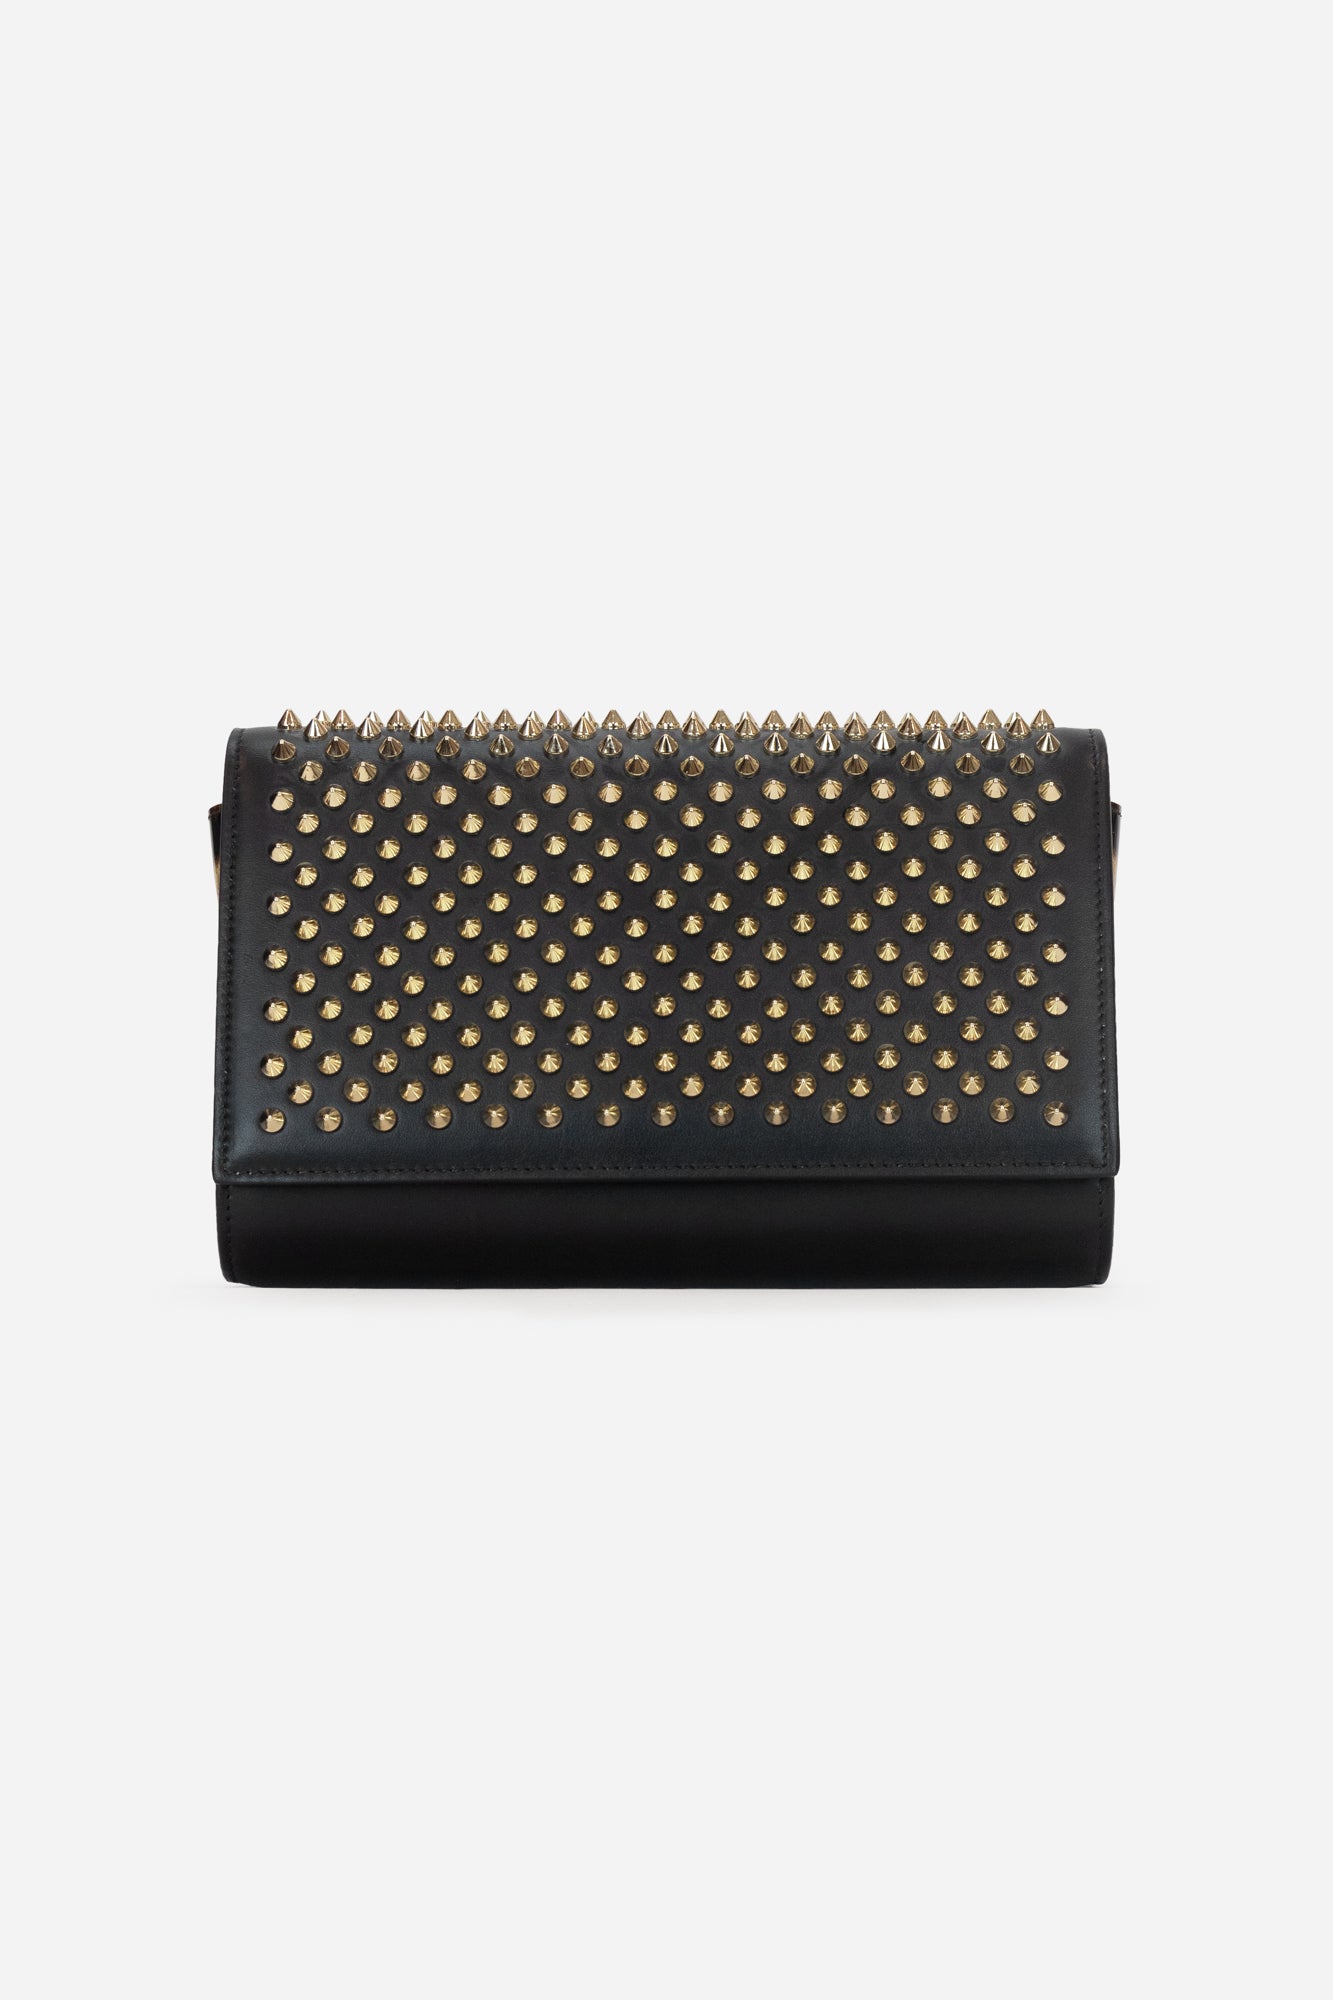 Leather Studded Clutch with Crossbody Chain